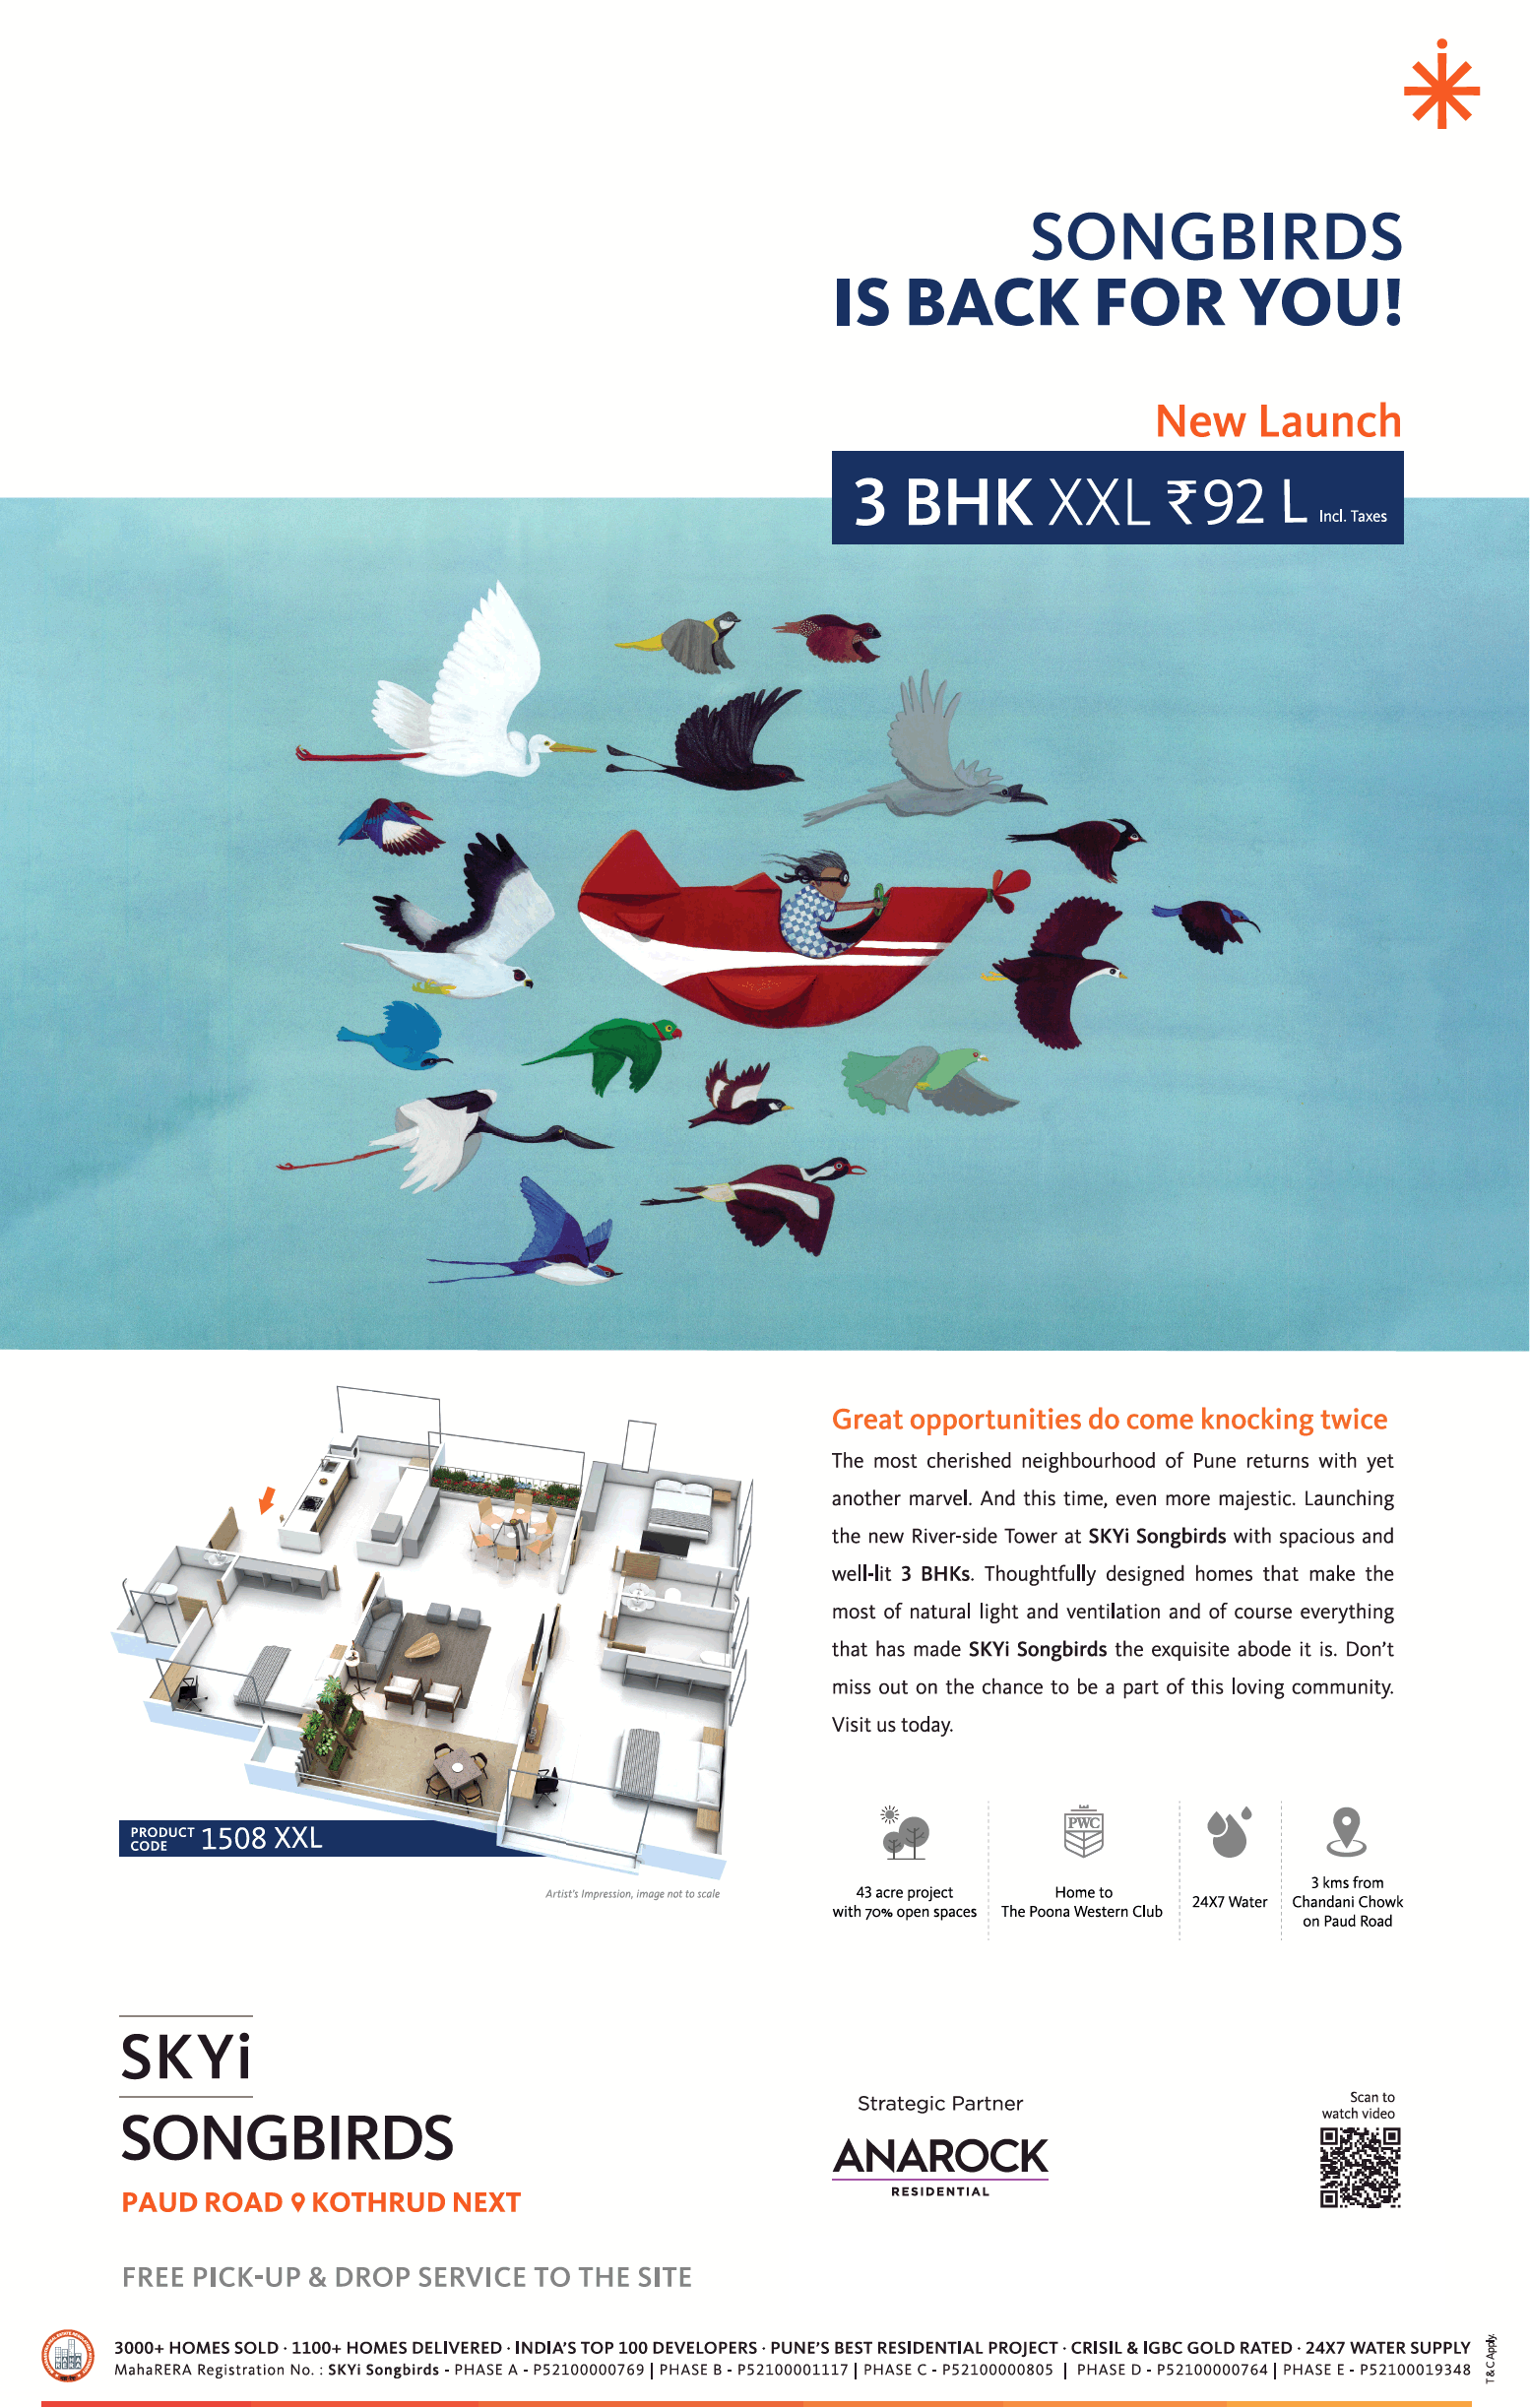 New launch 3 BHK XXL Rs 92 lakh at Skyi Songbirds in Pune